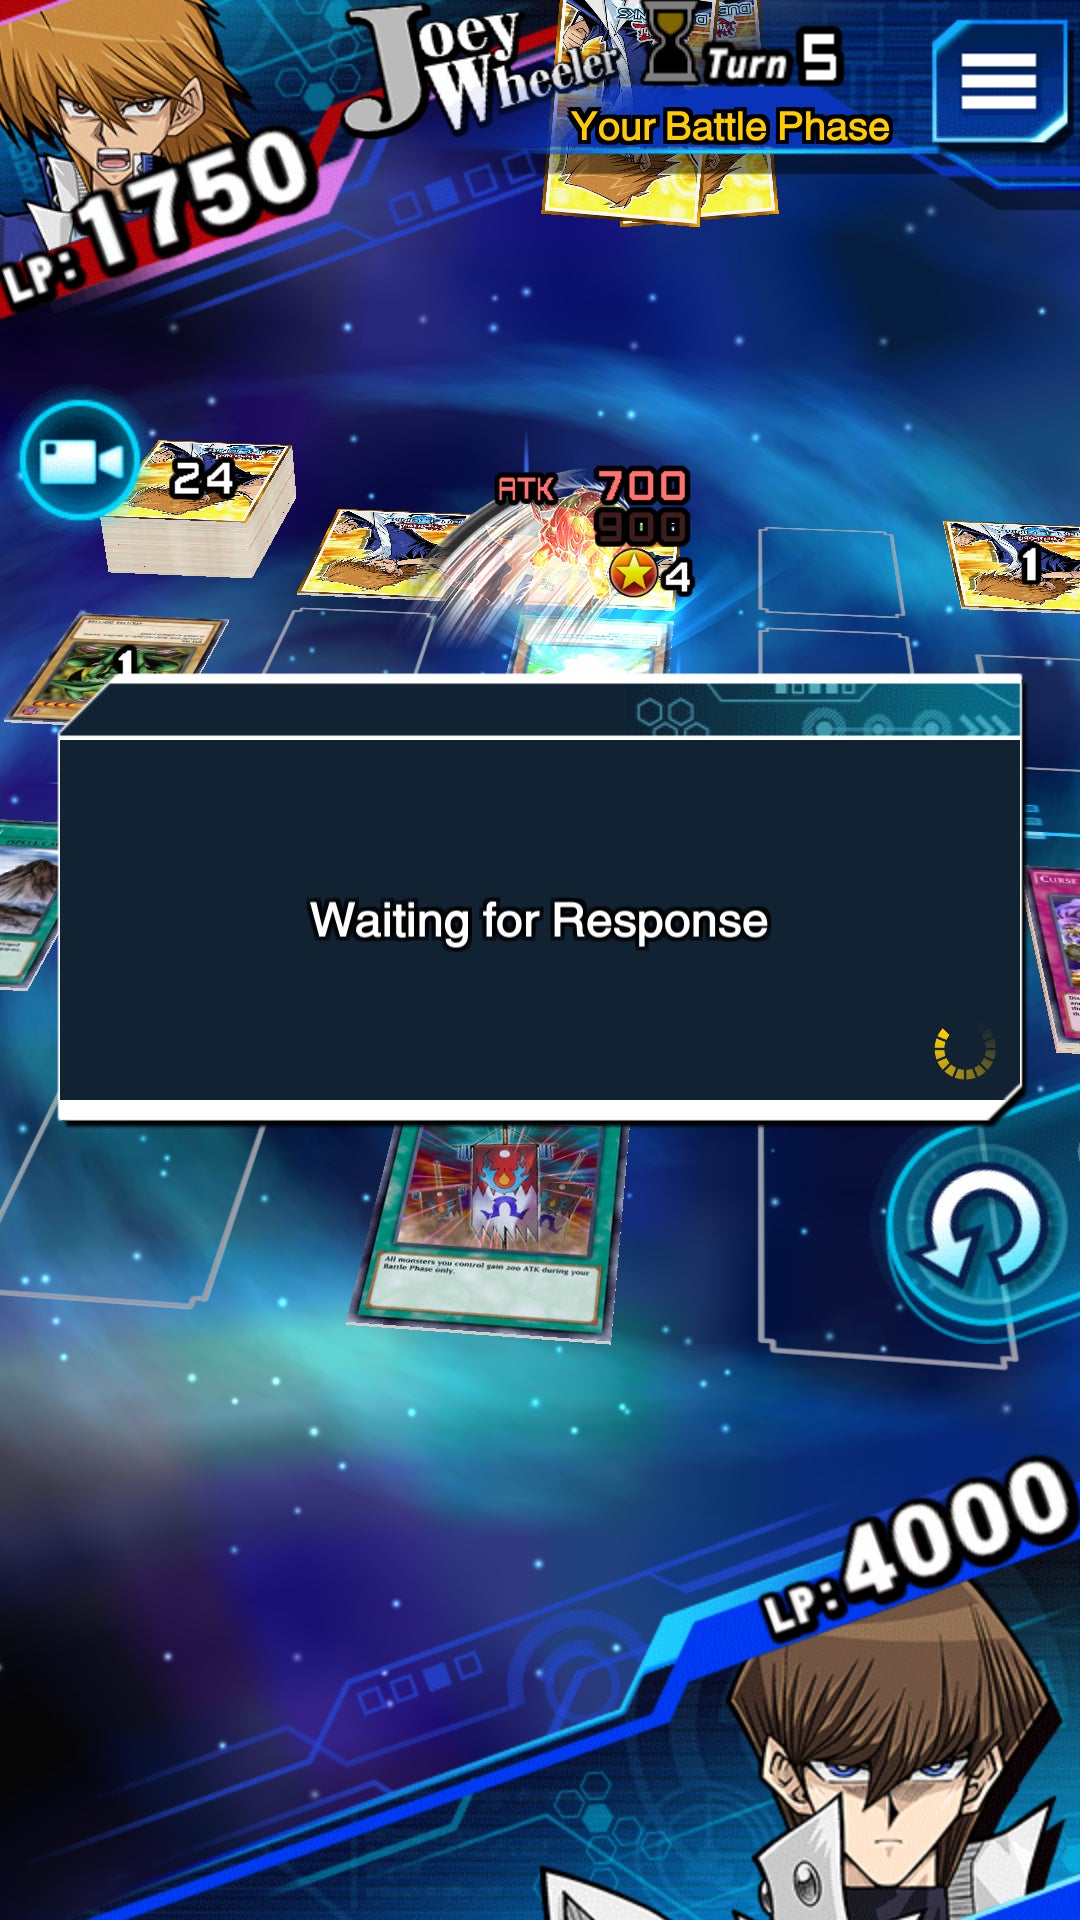 When an opponent quits, you're forced to 'Wait for Response' until you're given the win - Yu-Gi-Oh! Duel Links Review: A mobile reimagination of the classic TCG